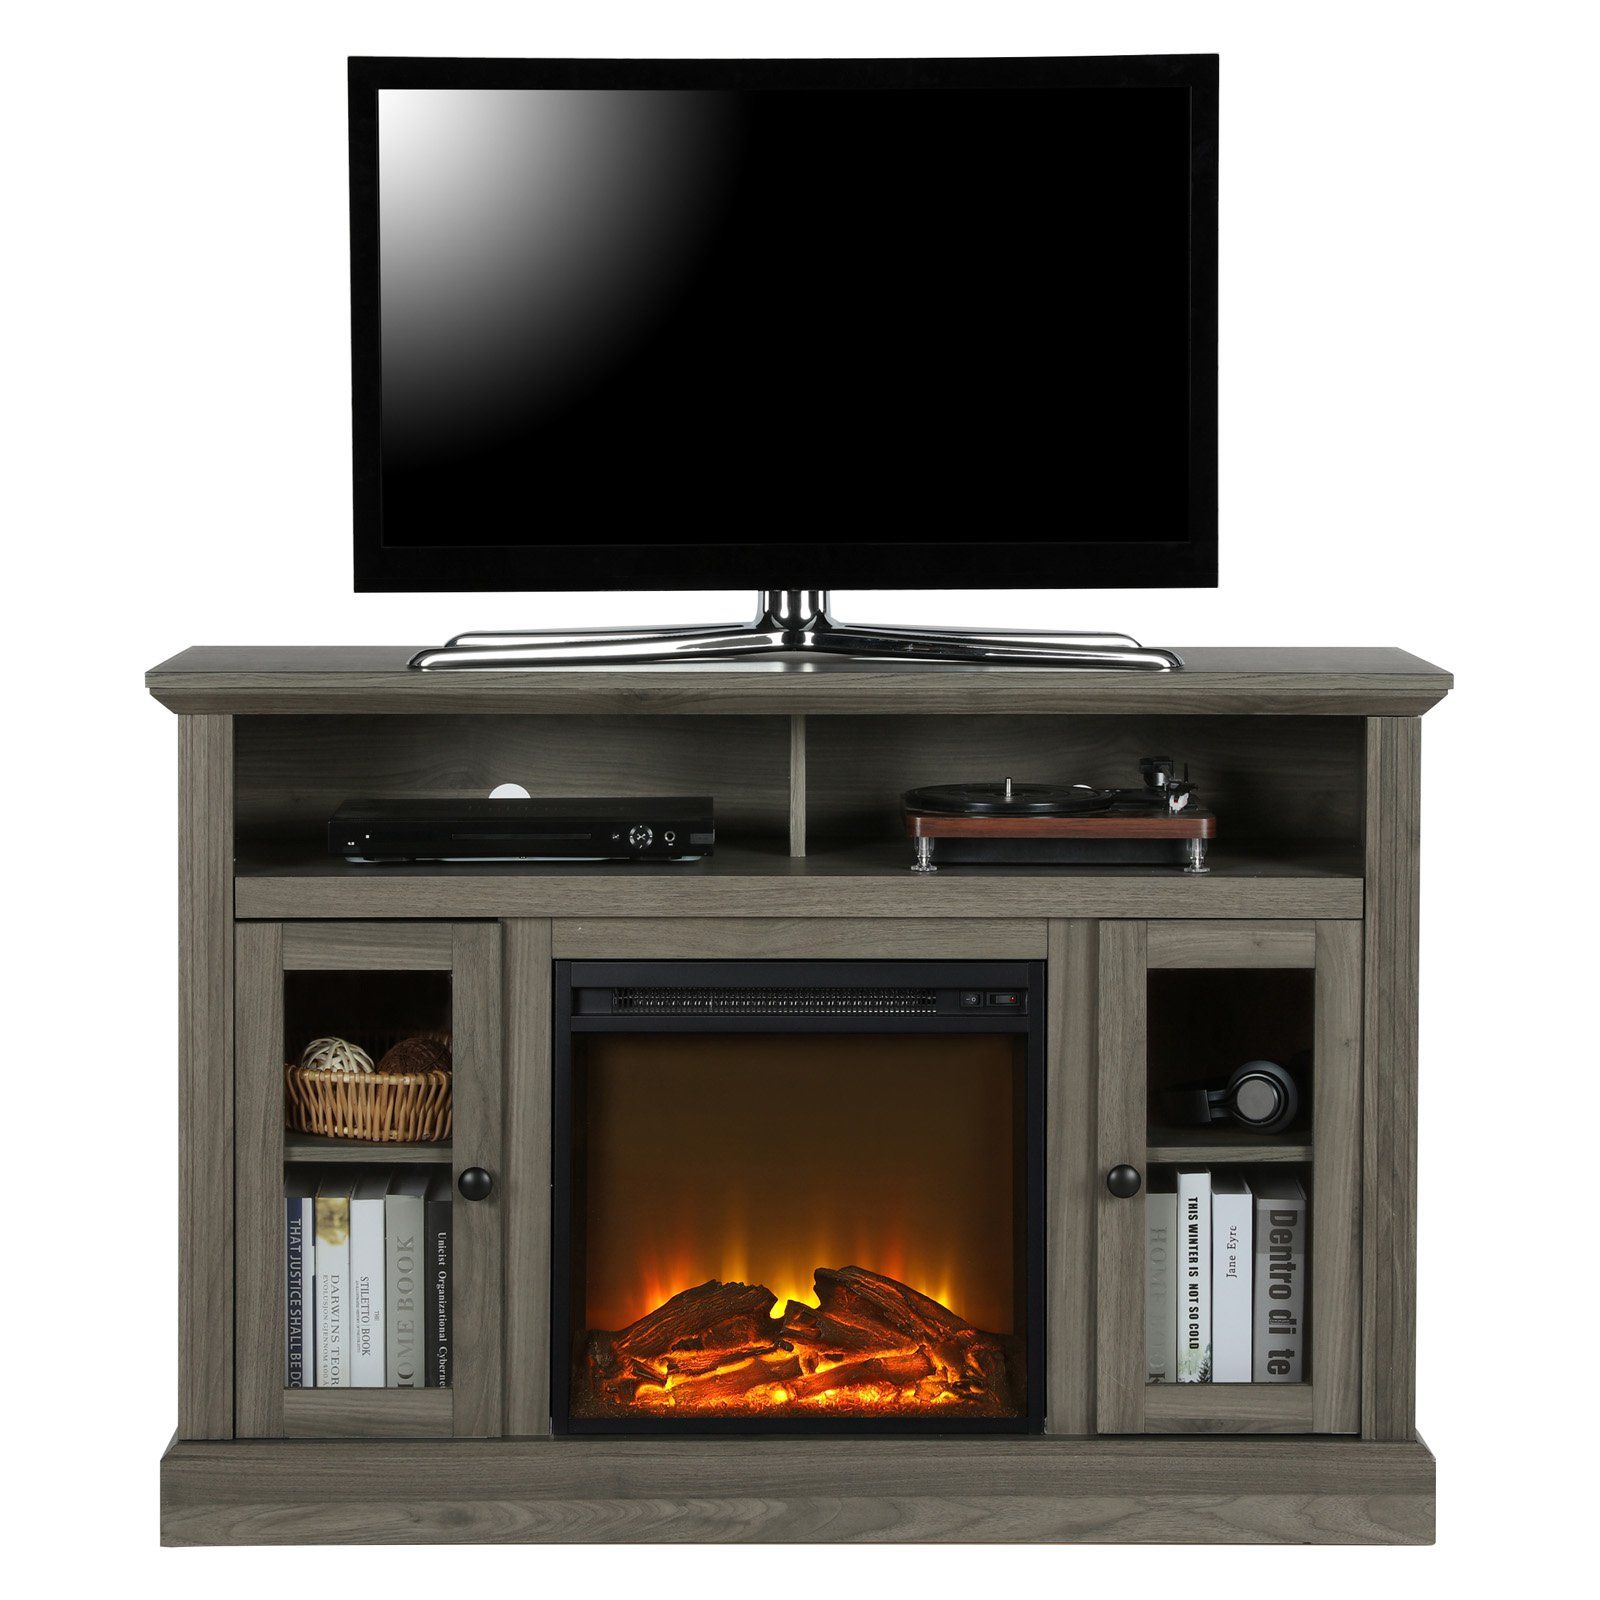 Best Fireplace Tv Stand Elegant Ameriwood Home Chicago Electric Fireplace Tv Stand In 2019